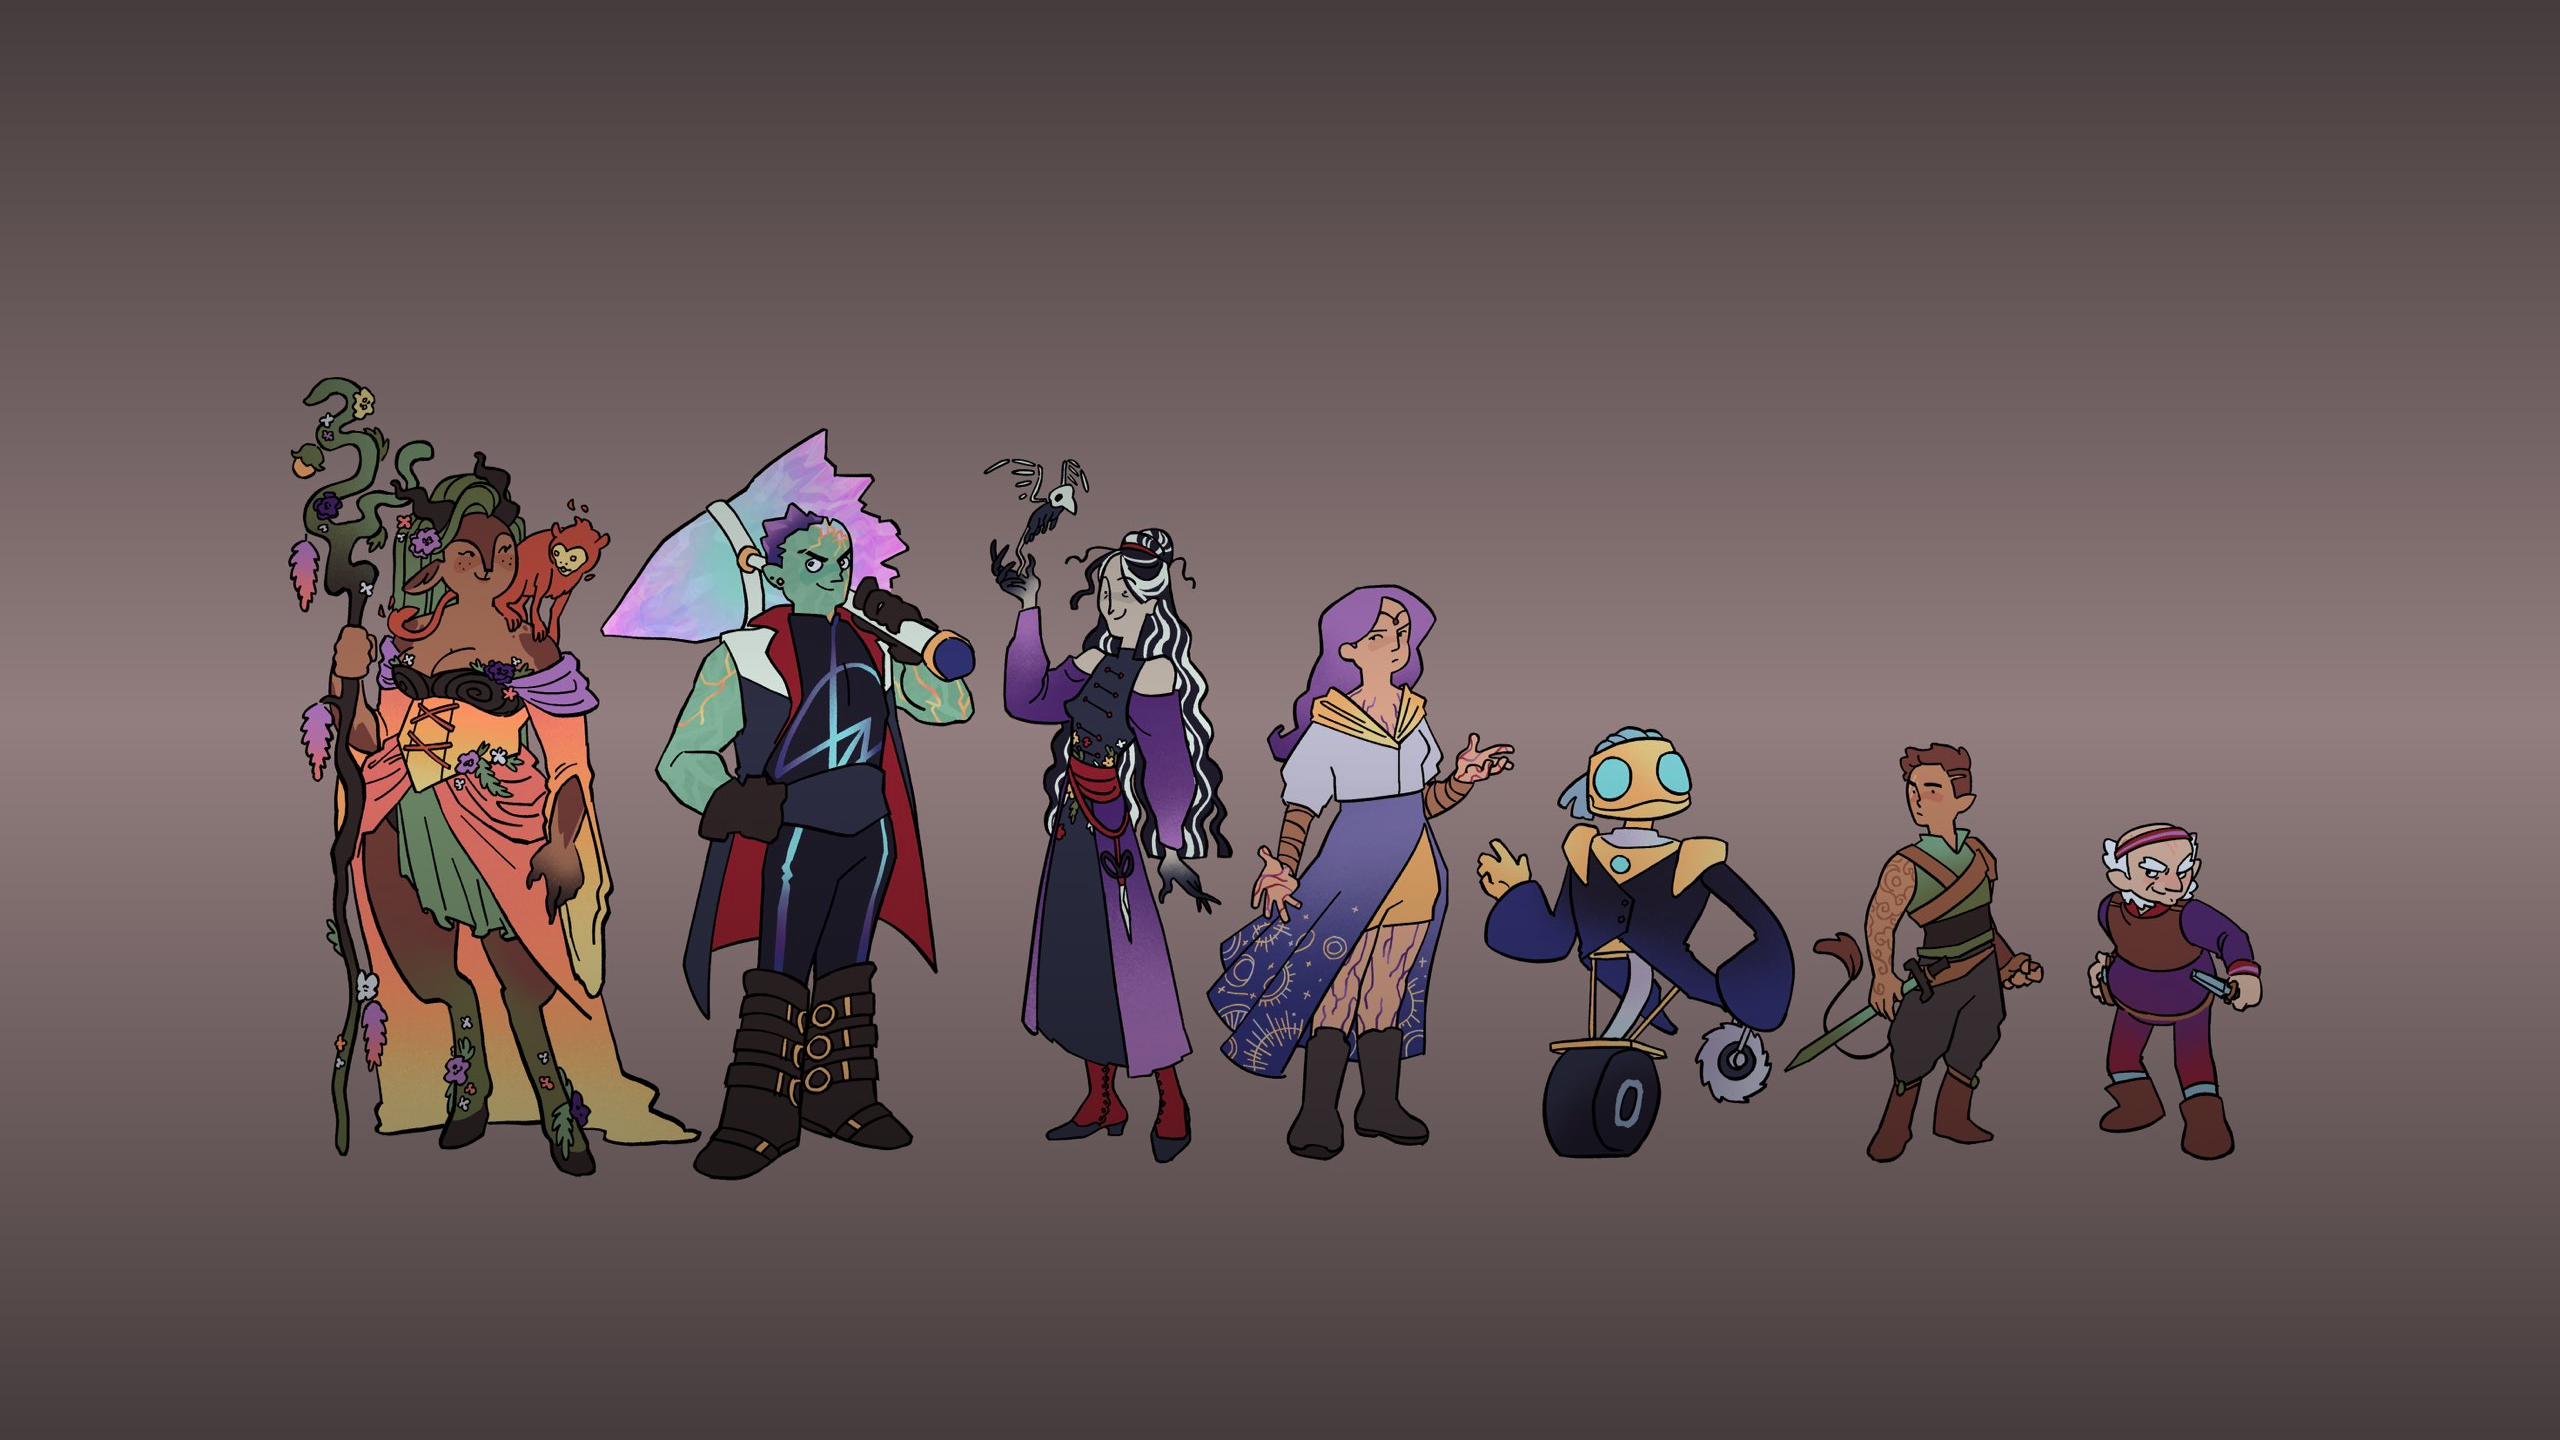 General 2560x1440 Critical Role Critical Role: Bells Hells Fearne Calloway (Critical Role) Ashton Greymoore (Critical Role) Laudna (Critical Role) Imogen Temult (Critical Role) Fresh Cut Grass (Critical Role) Orym of the Air Ashari (Critical Role) Chetney Pock O'Pea (Critical Role) simple background weapon staff fantasy girl hammer birds skeleton dead animals dead undead witch sorcerer sorceress Warlock warlocks robot cleric warrior barbarian Barbarians rogue headband leather armor boots leather boots Satyr skirt dress wheels sword monkey short hair gnomes tail hair ornament tiaras pink hair purple hair scars bald